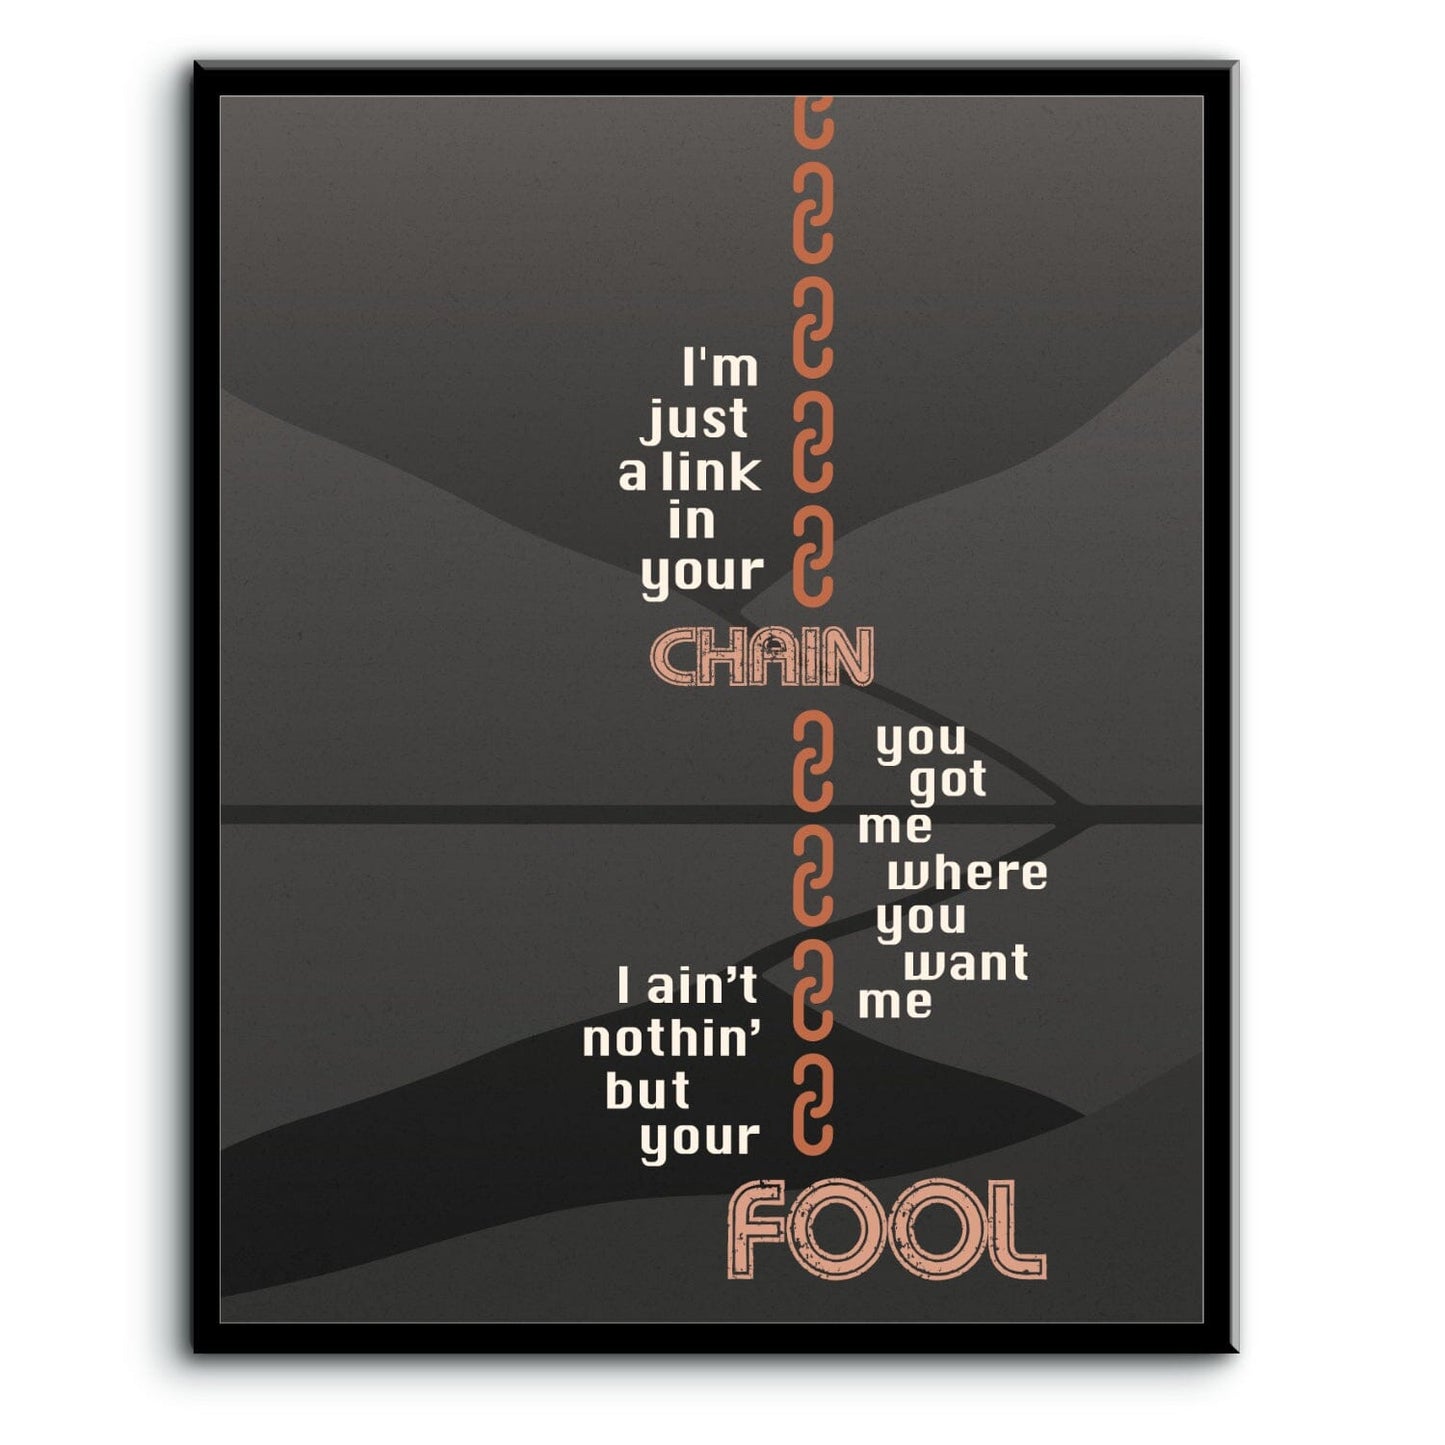 Chain of Fools by Aretha Franklin - Motown Music Lyric Art Song Lyrics Art Song Lyrics Art 8x10 Plaque Mount 